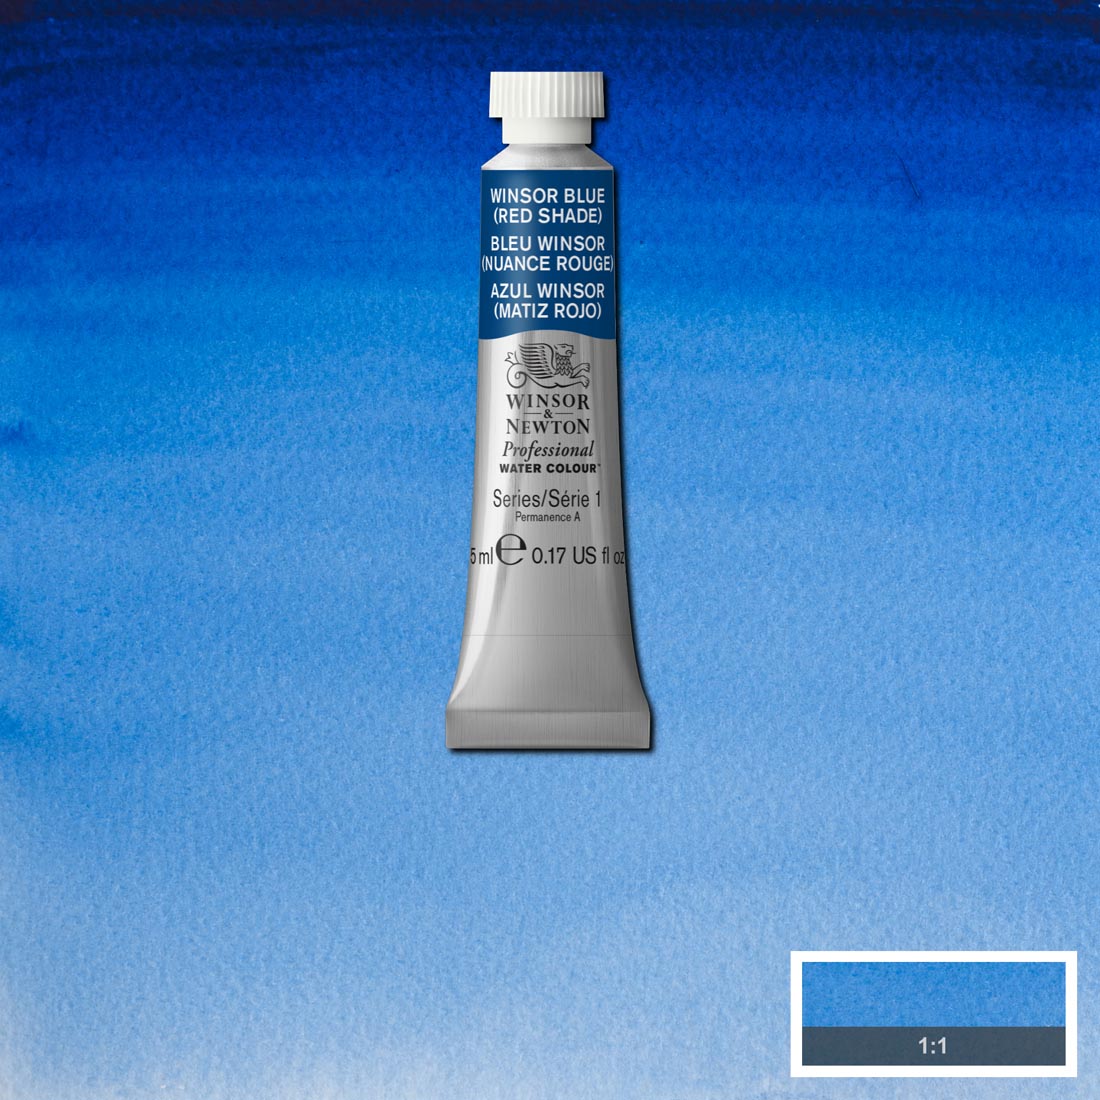 Tube of Winsor Blue (Red Shade) Winsor & Newton Professional Water Colour with a paint swatch for the background